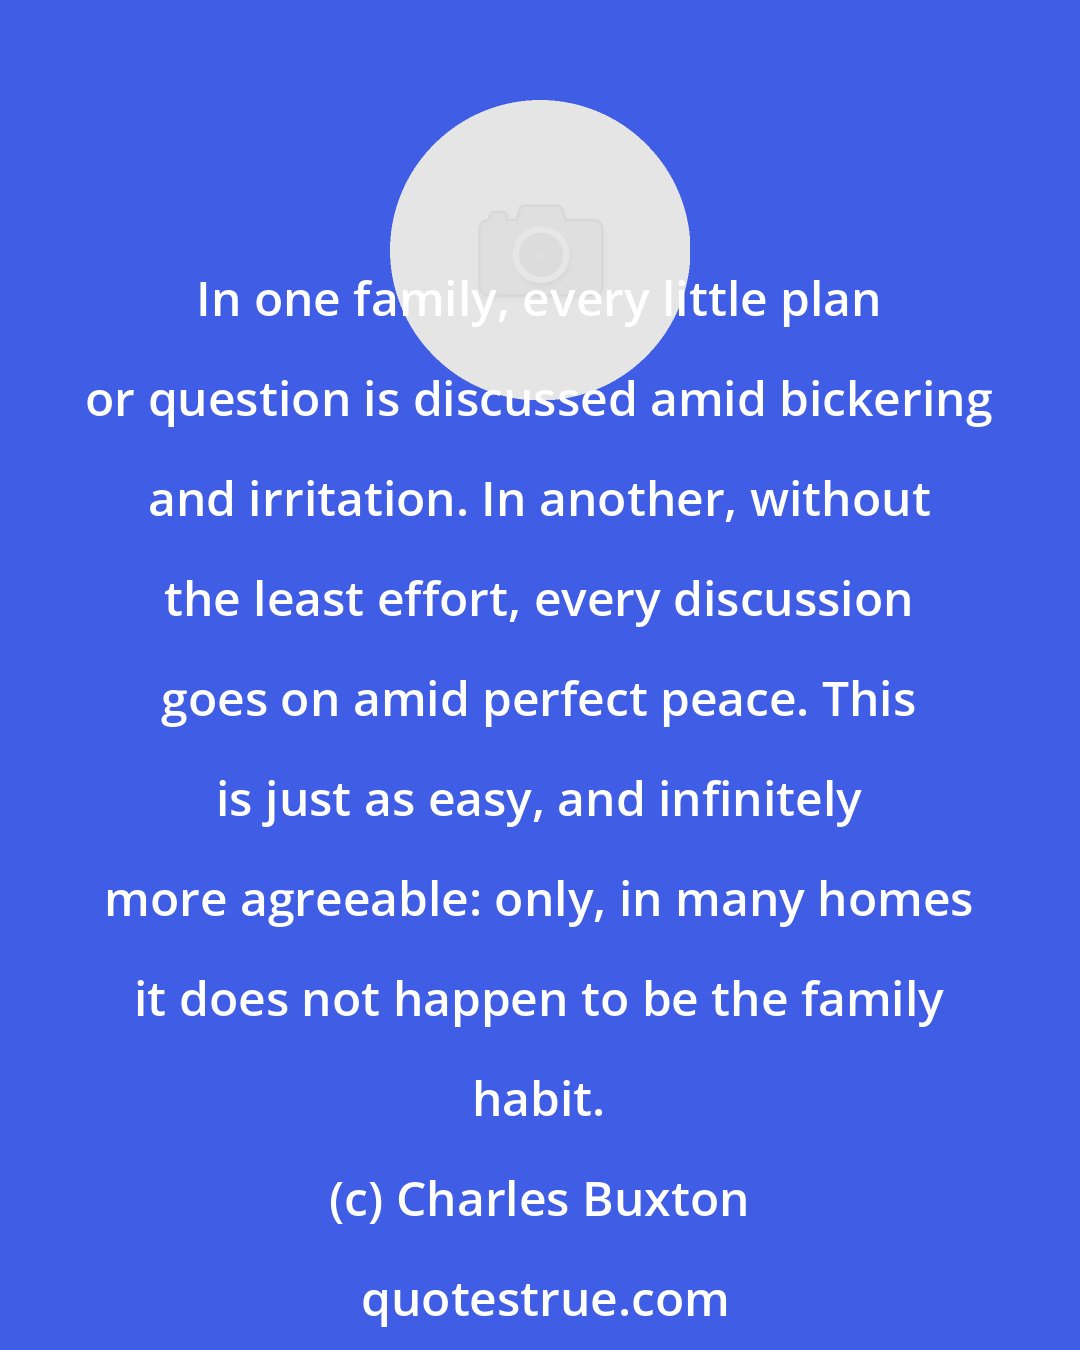 Charles Buxton: In one family, every little plan or question is discussed amid bickering and irritation. In another, without the least effort, every discussion goes on amid perfect peace. This is just as easy, and infinitely more agreeable: only, in many homes it does not happen to be the family habit.